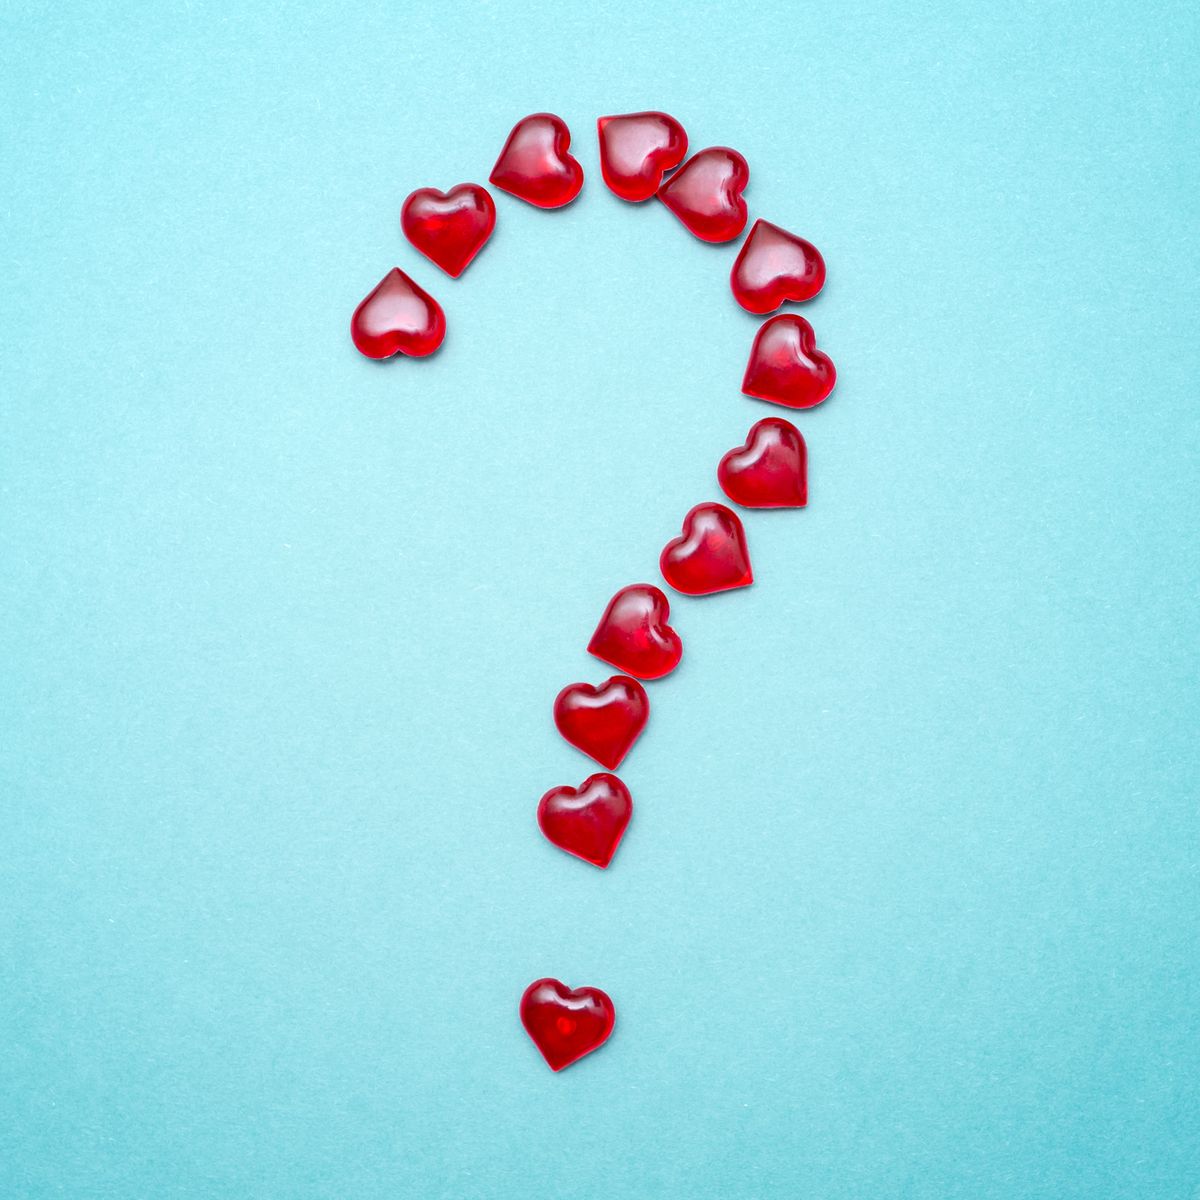 the question mark in the form of red hearts on a blue background